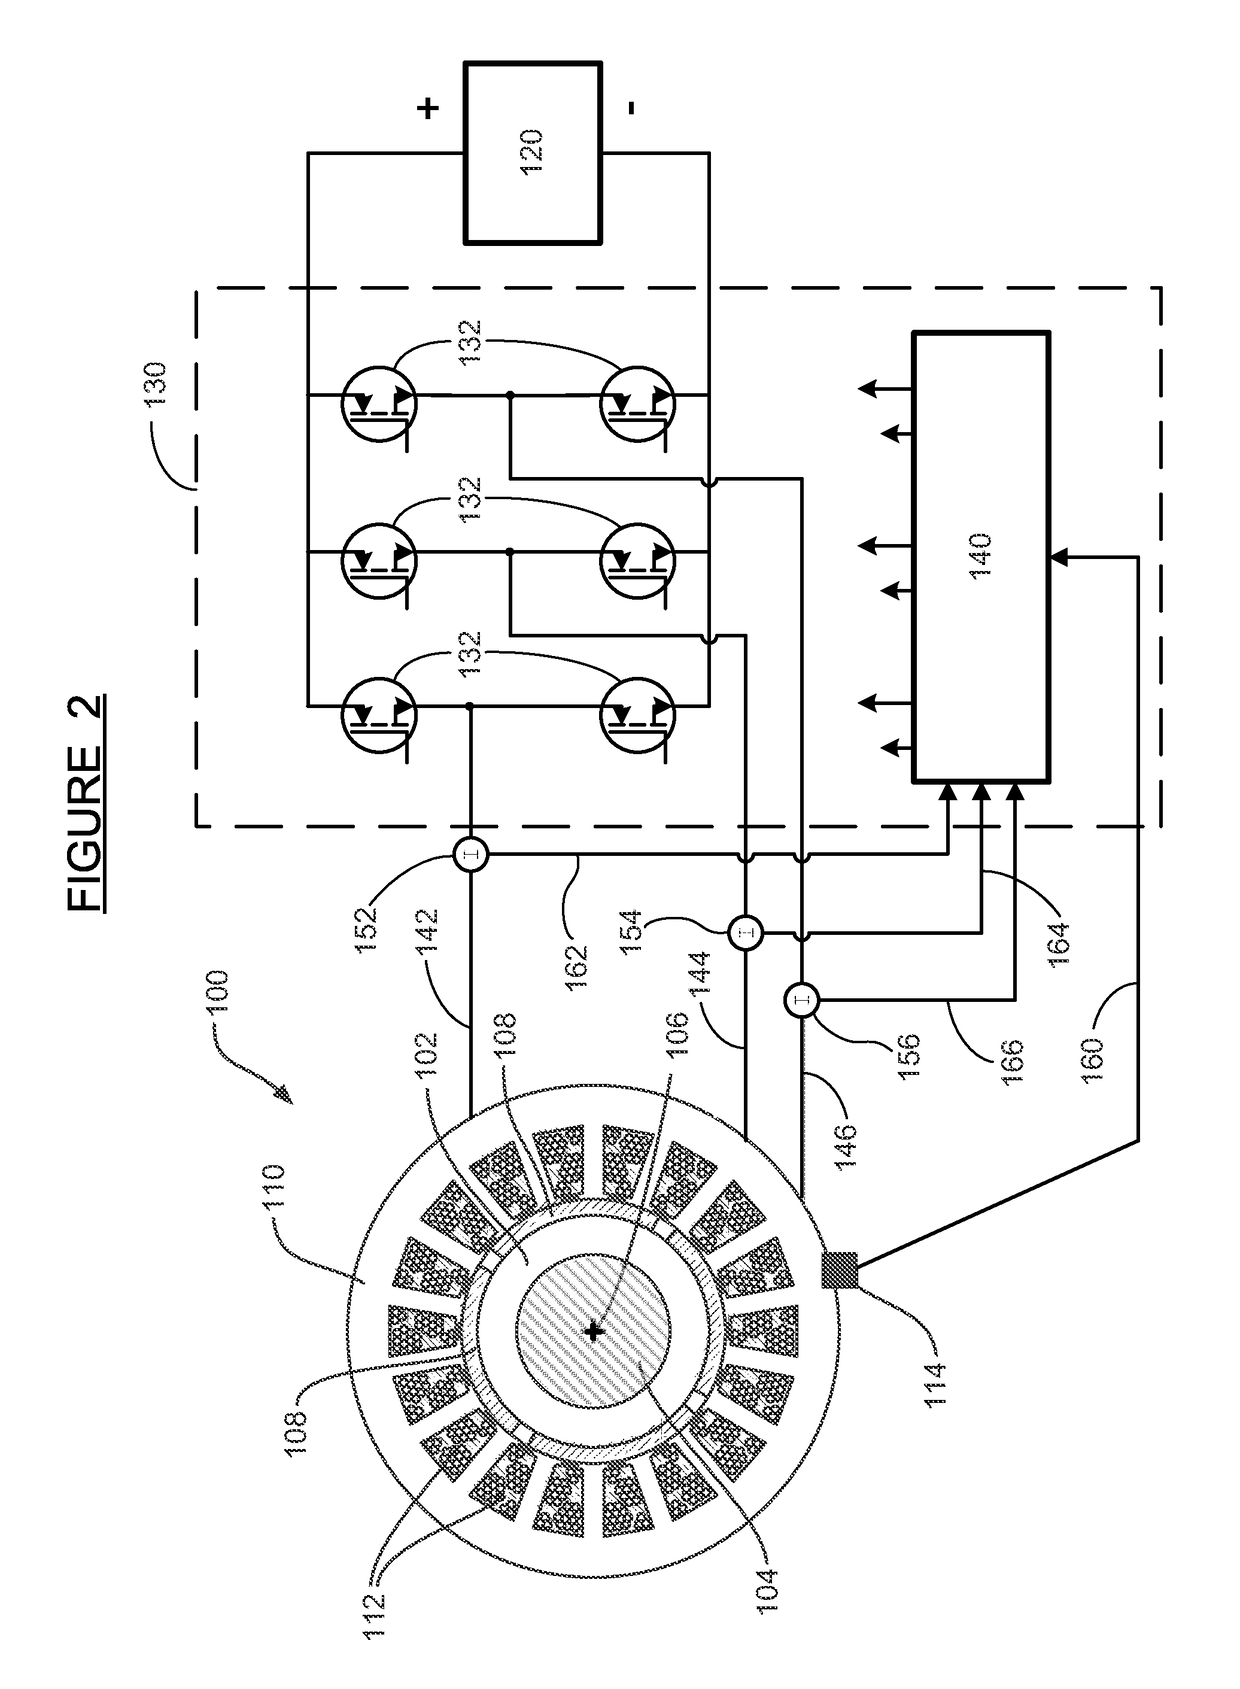 Method and apparatus for identifying the winding short of bar wound electric machine at standstill condition